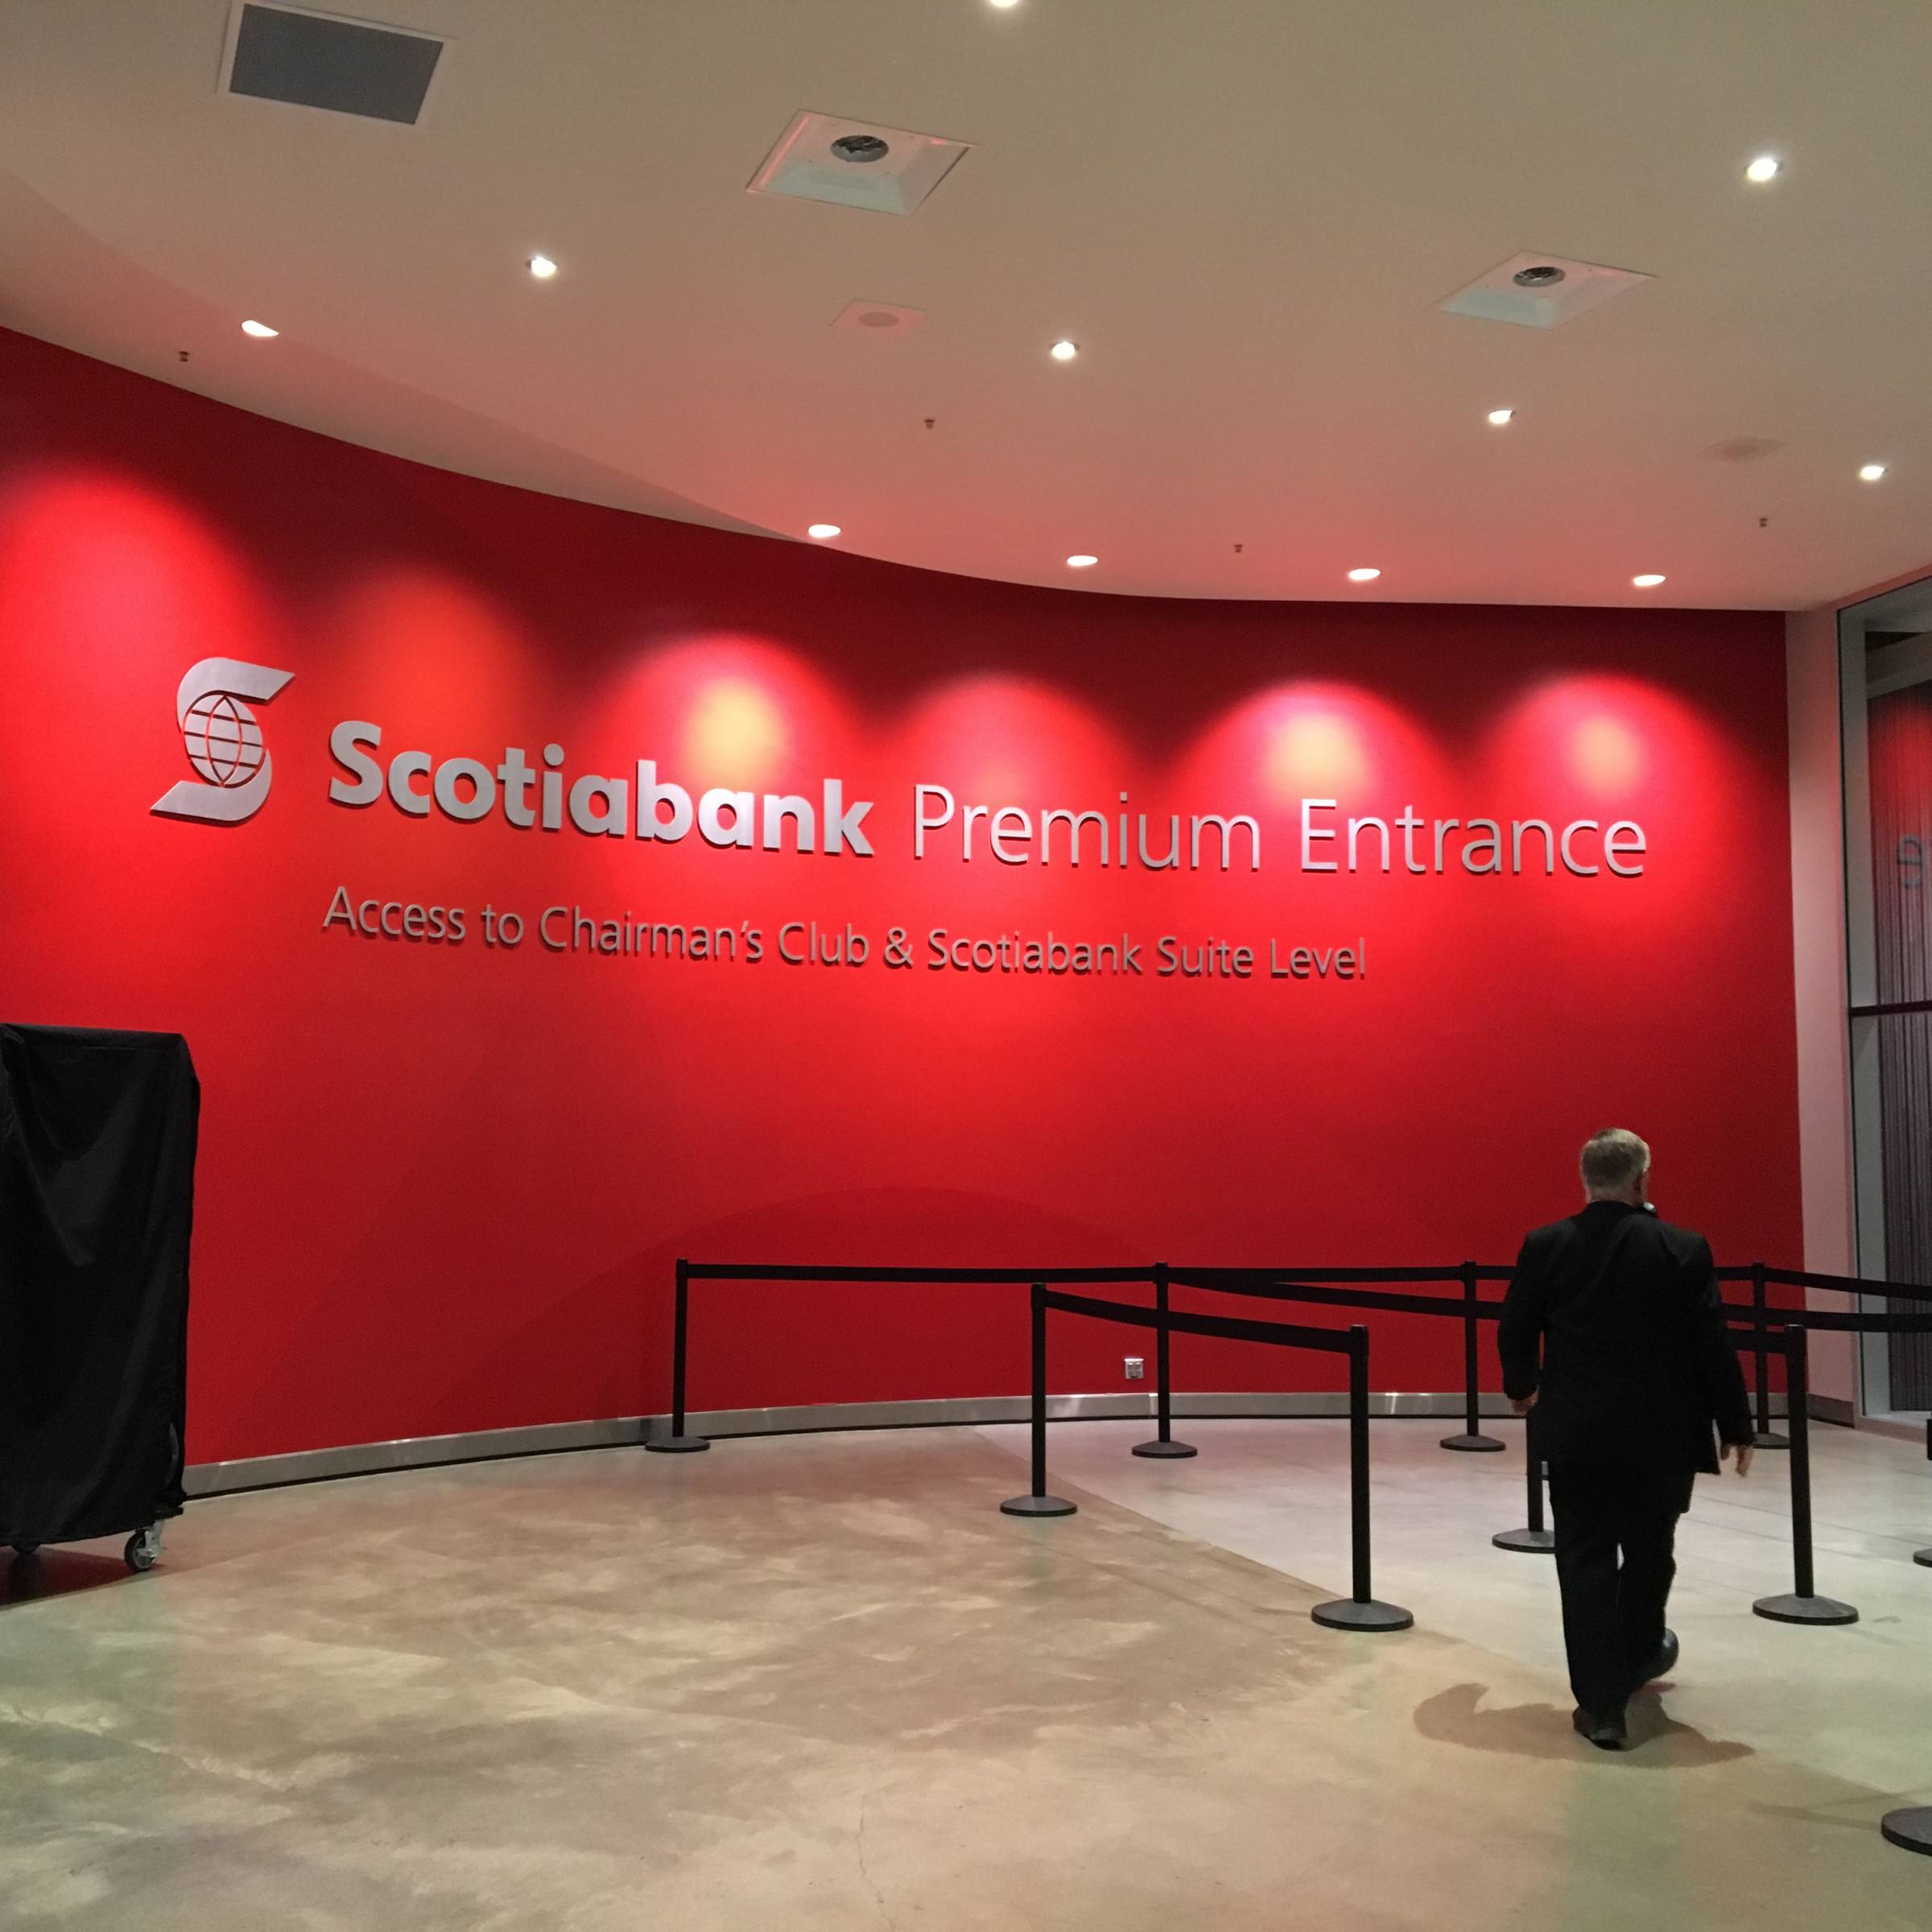 Scotiabank Premium Entrance at Rogers Place